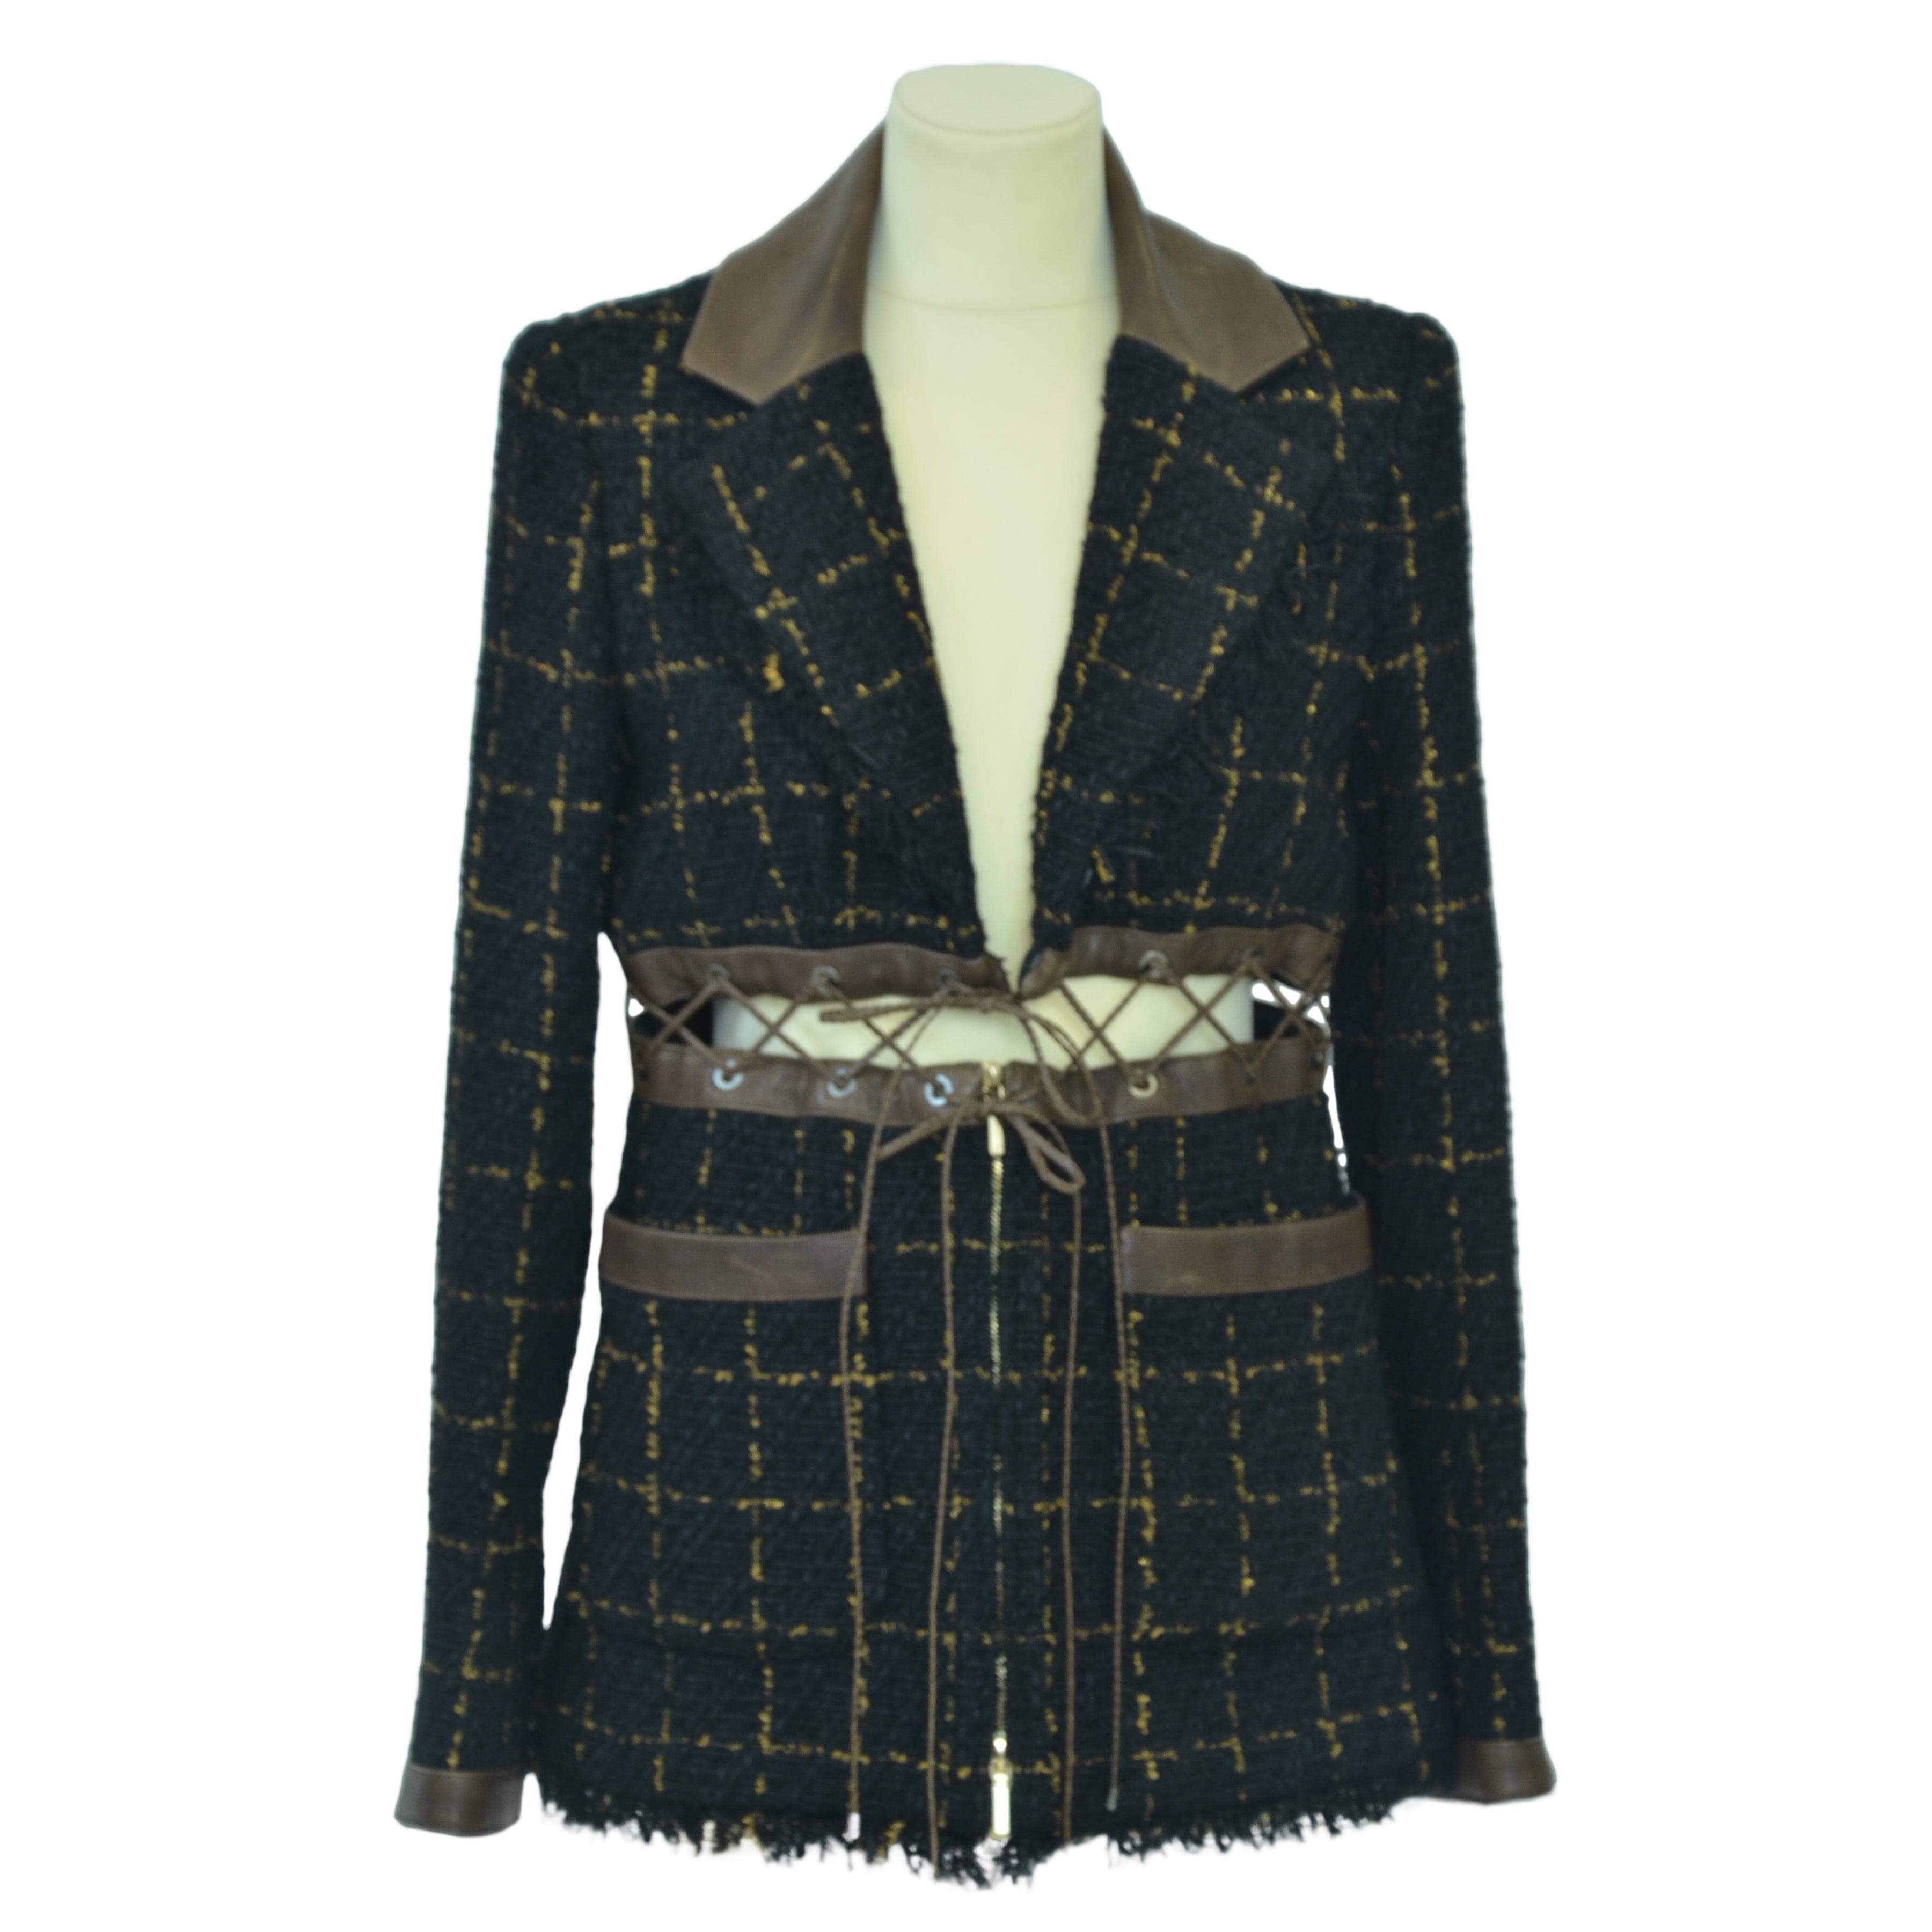 Black/Gold Fantasy Tweed Jacket with Leather Trims